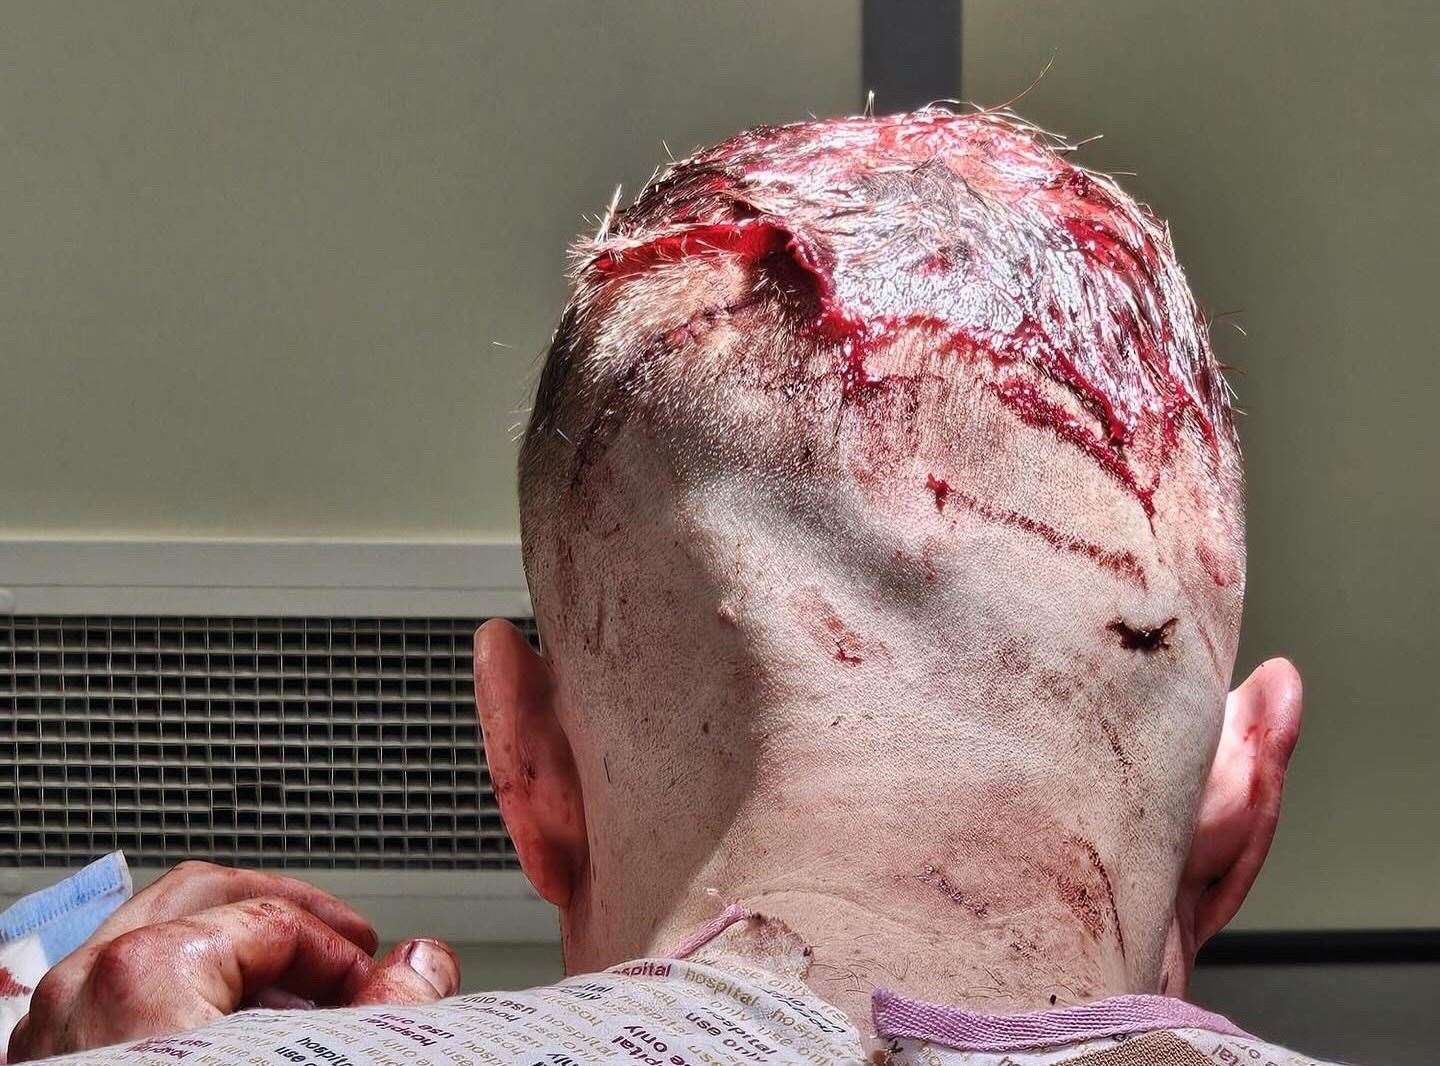 The victim was treated for wounds to the back of his head